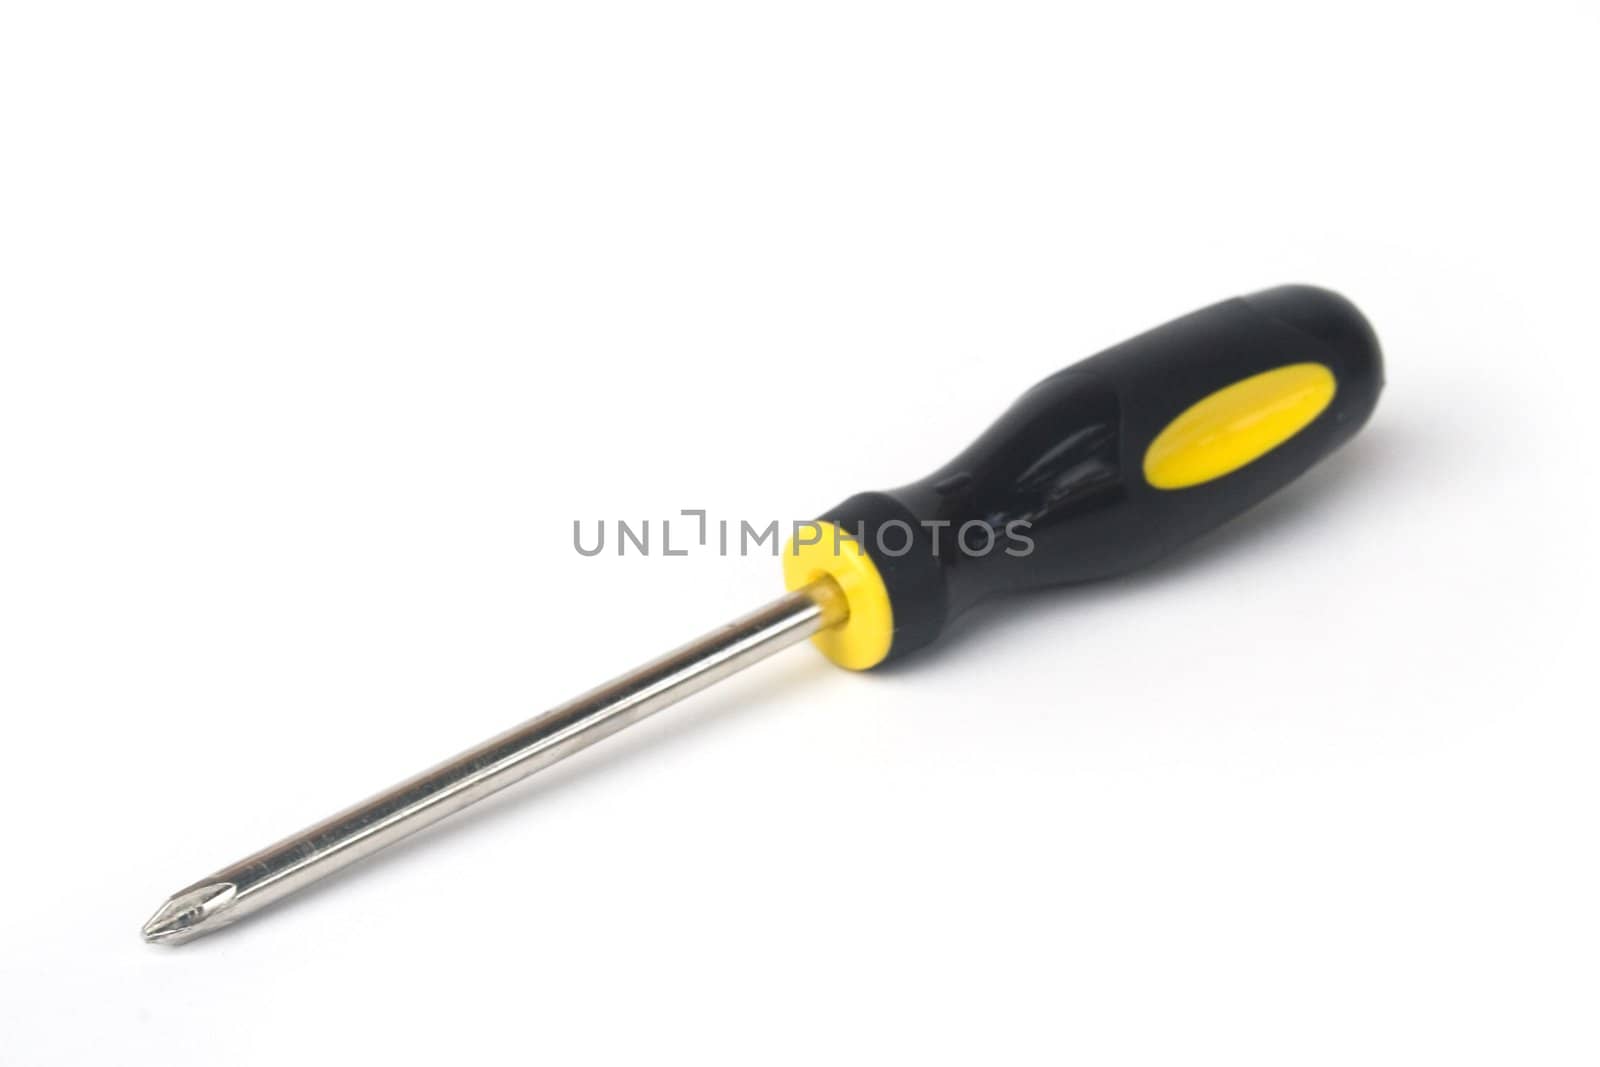 Yellow and black handled phillips screwdriver on white background